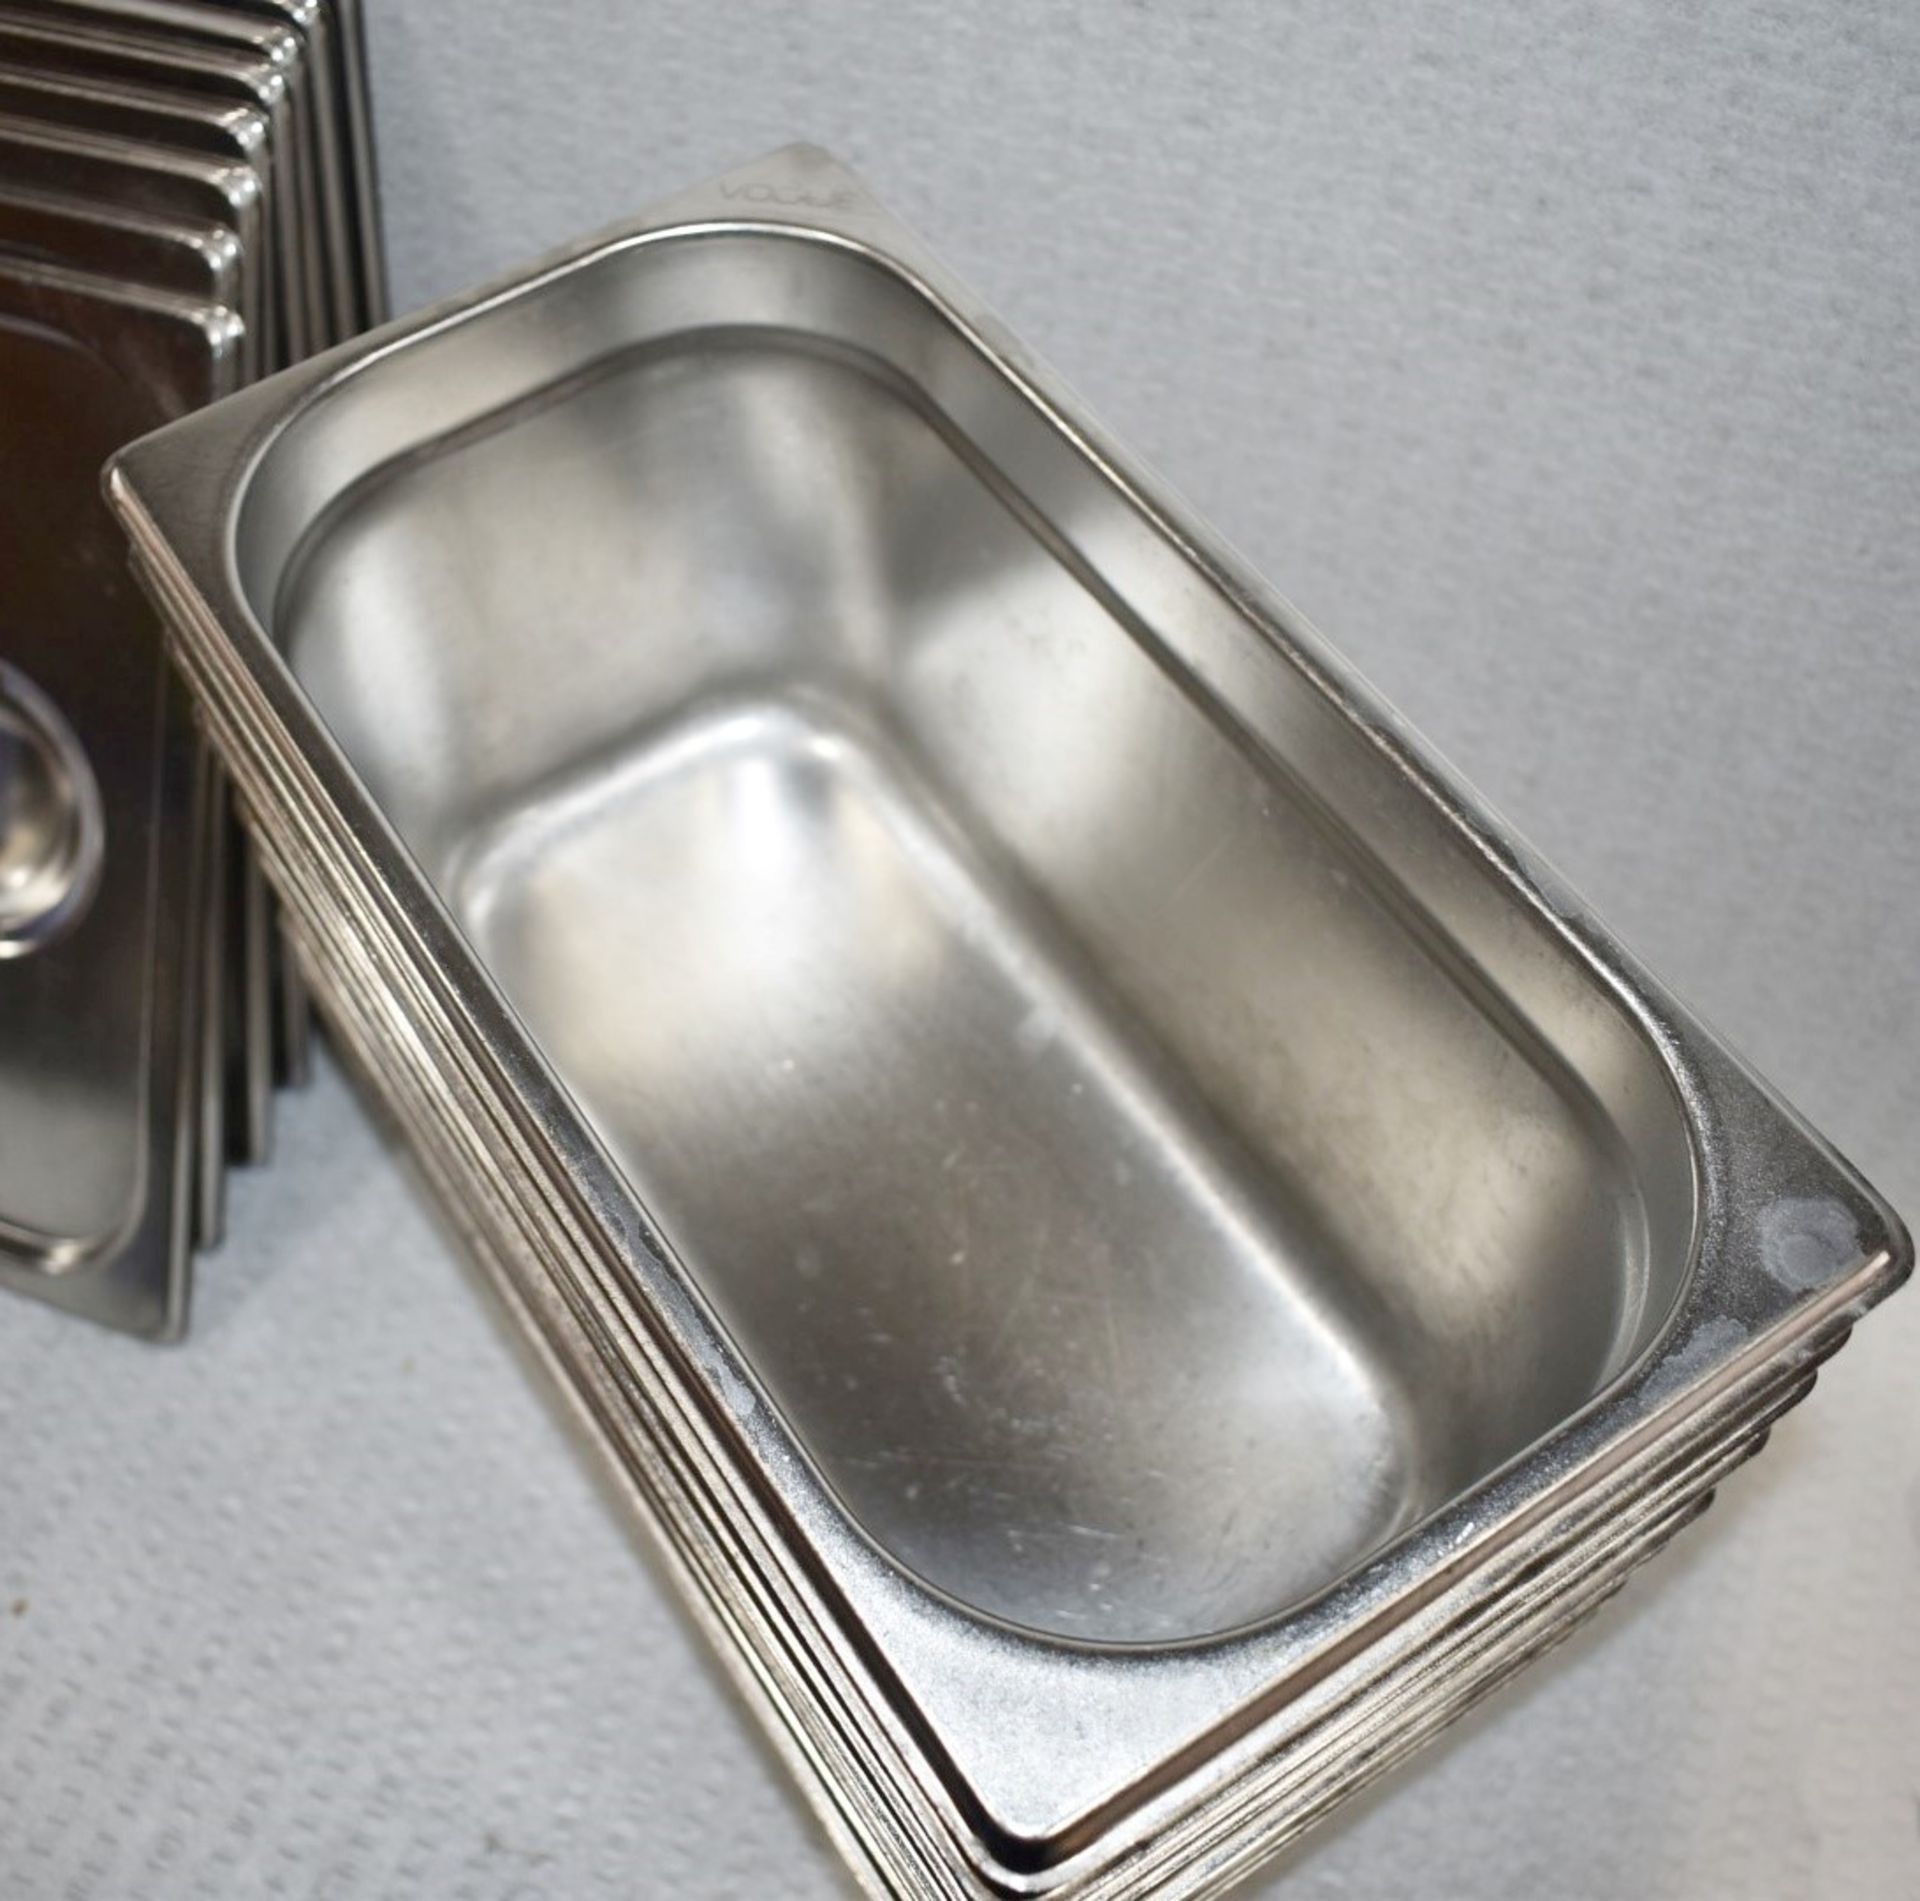 8 x Vogue Stainless Steel 1/3 Gastronorm Pans With Lids - Size: H15 x W17.5 x L32 cms - Image 5 of 5